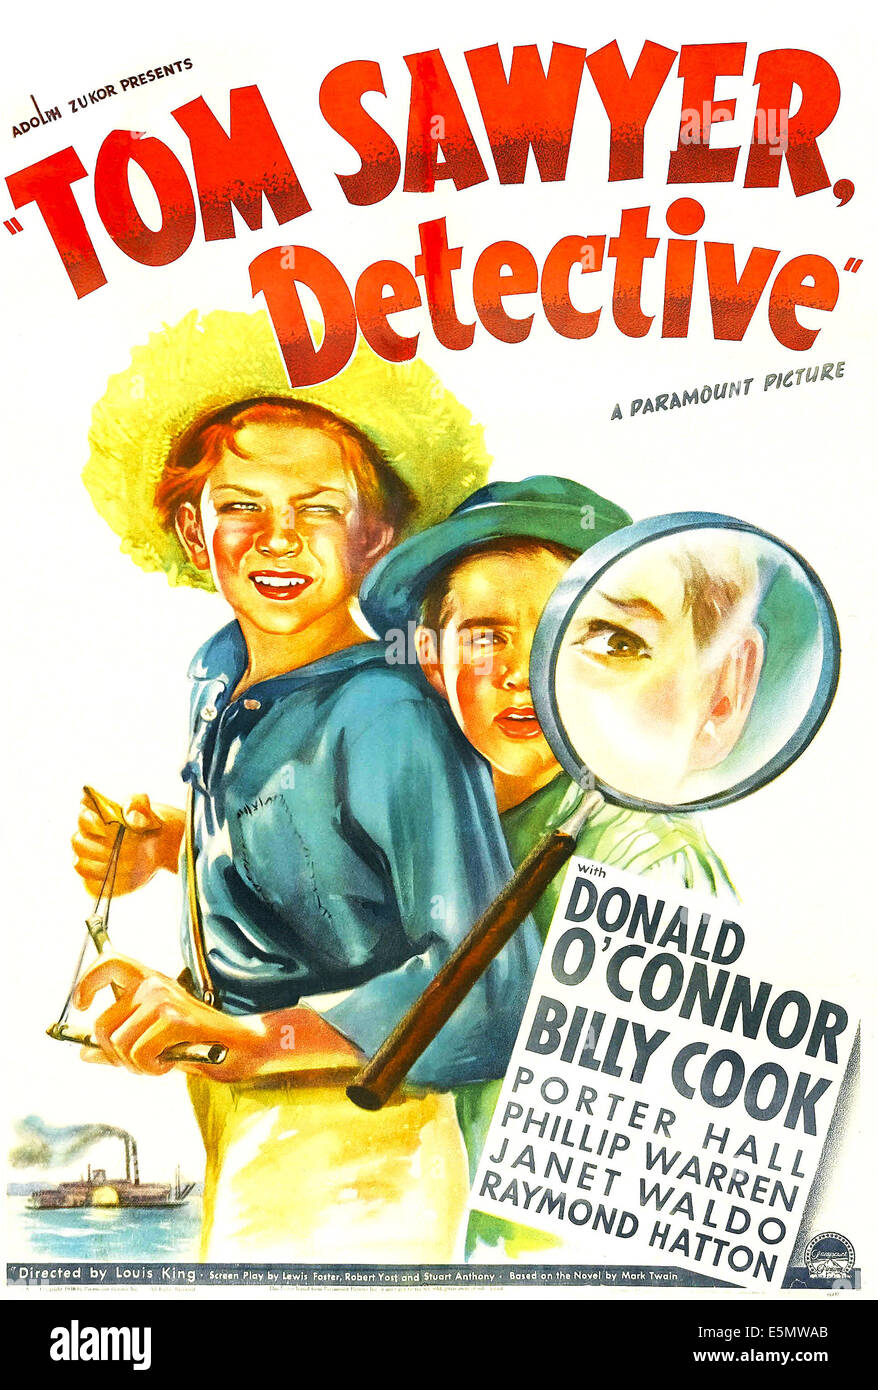 TOM SAWYER, DETECTIVE, US poster art, from left: Donald O'Connor as Huckleberry Finn, Billy Cook as Tom Sawyer, 1938 Stock Photo